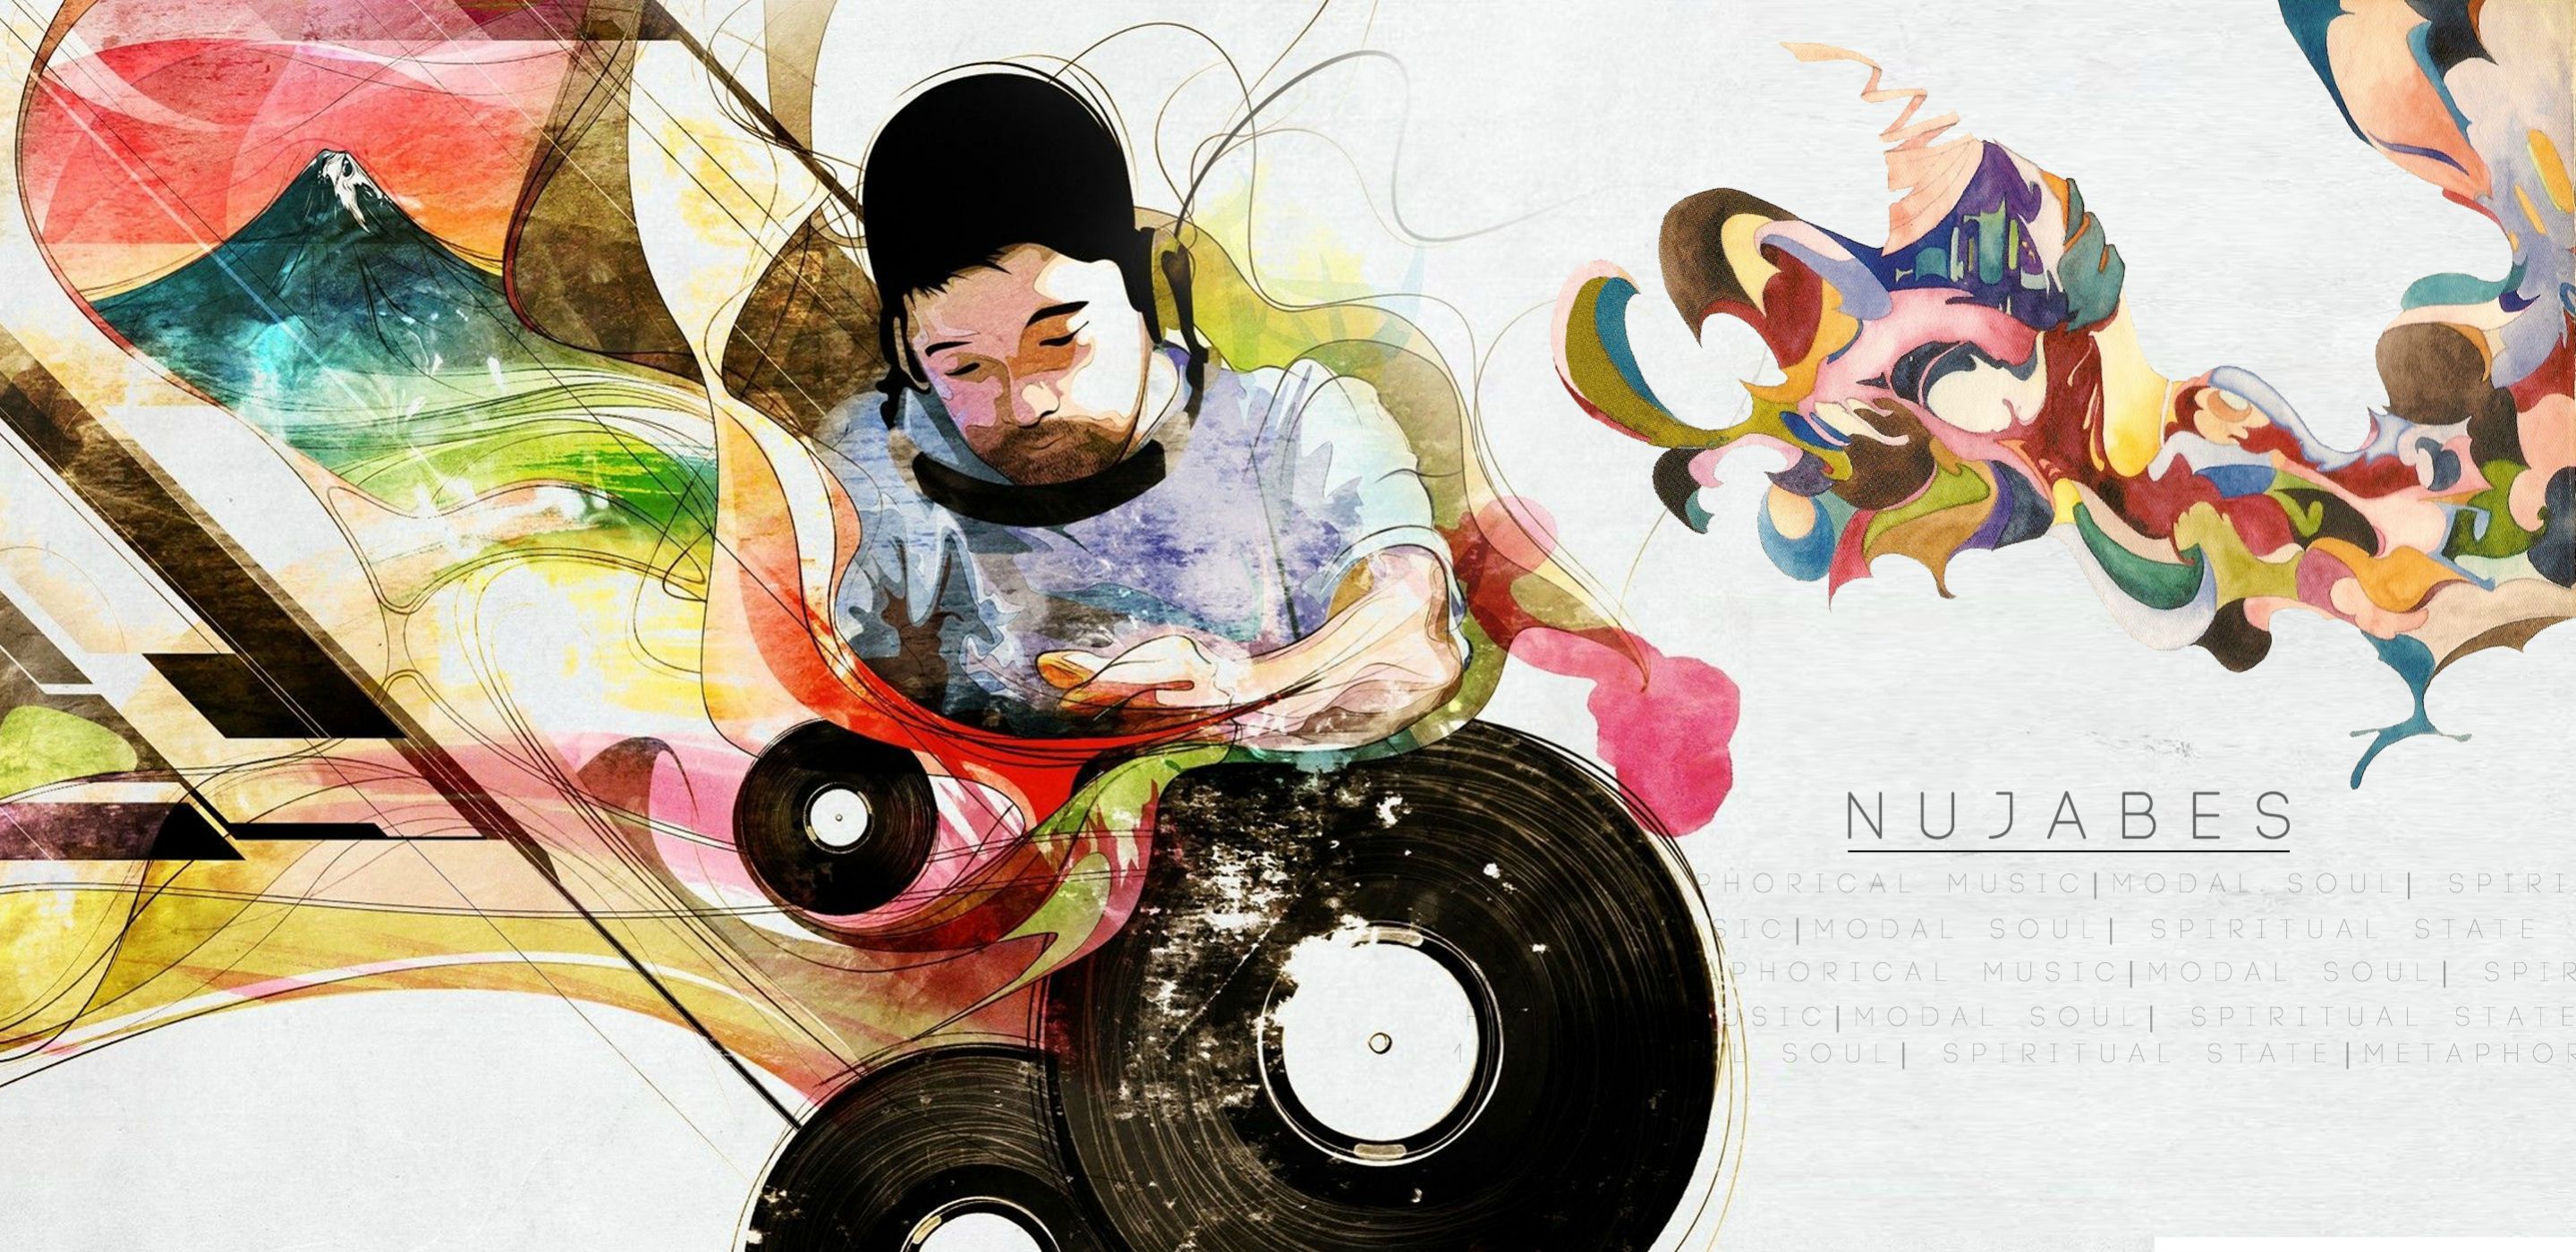 Nujabes Wallpaper Free Nujabes Background